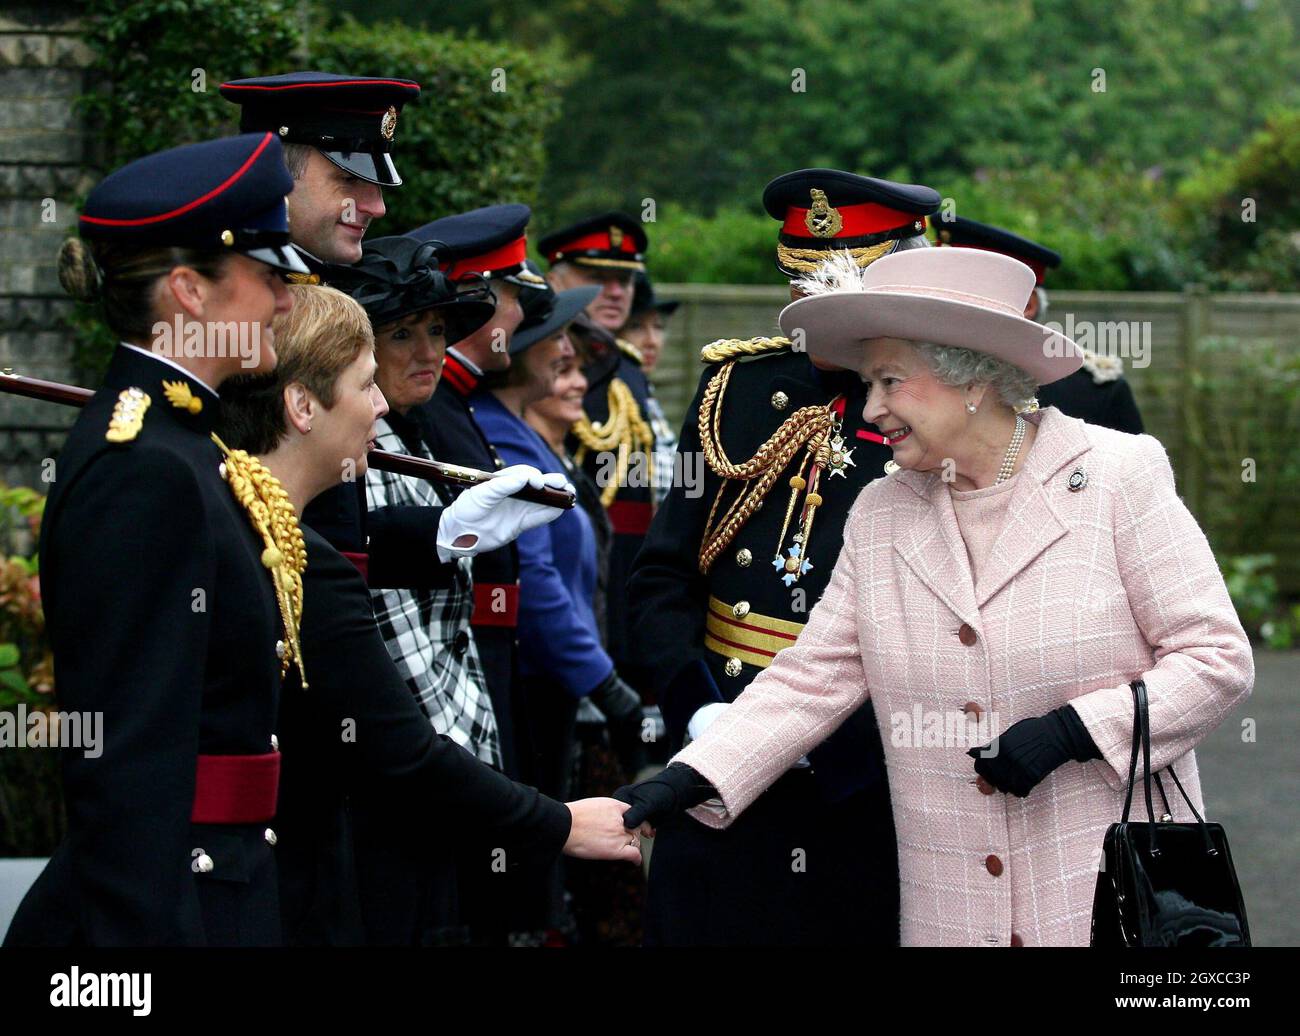 Queen Elizabeth II arrives for a visit to the Corps of Royal Engineers at Brompton Barracks in Chatham, Kent. Stock Photo